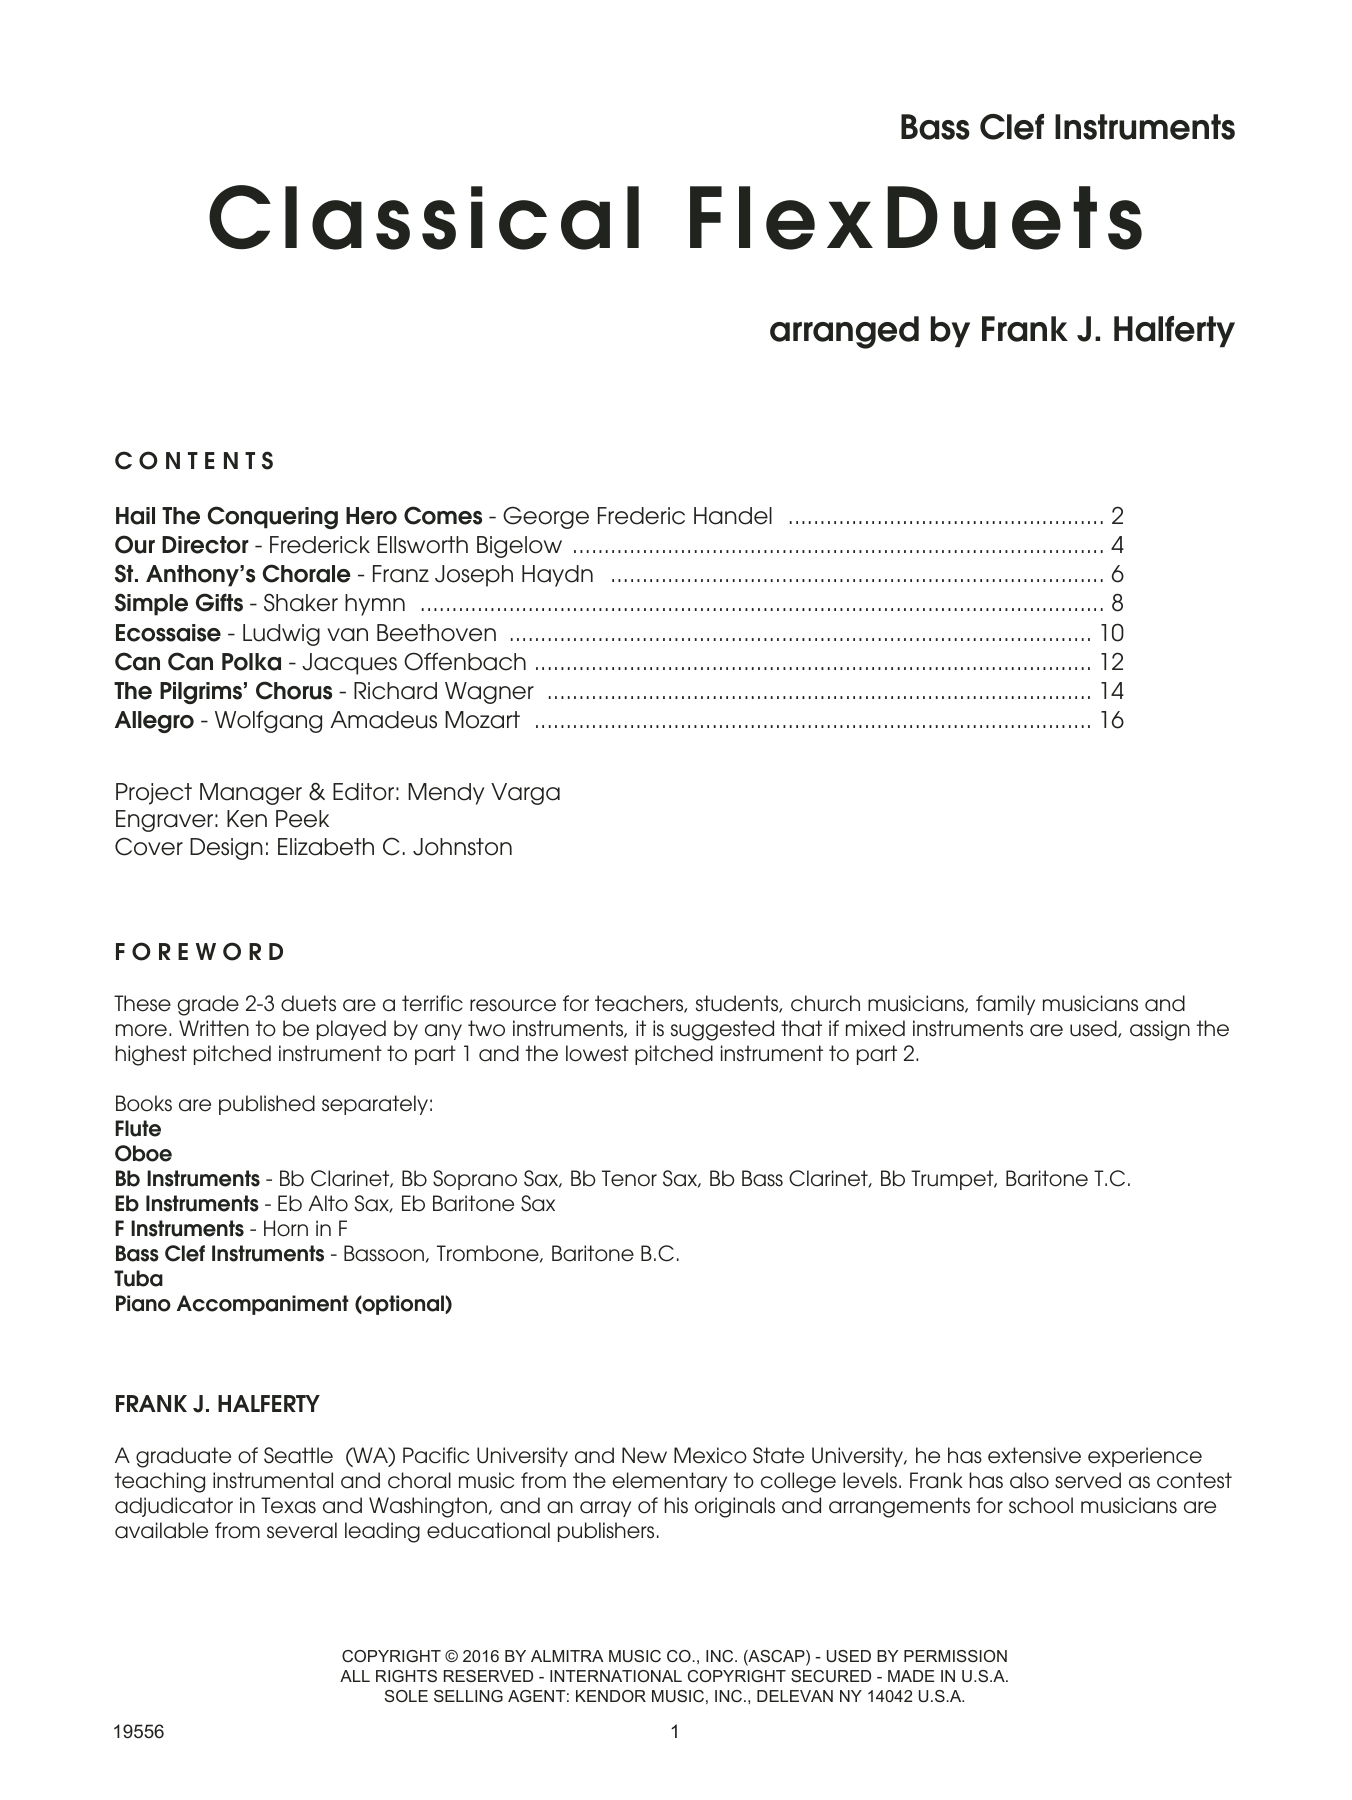 Frank J. Halferty Classical FlexDuets - Bass Clef Instruments sheet music notes and chords. Download Printable PDF.